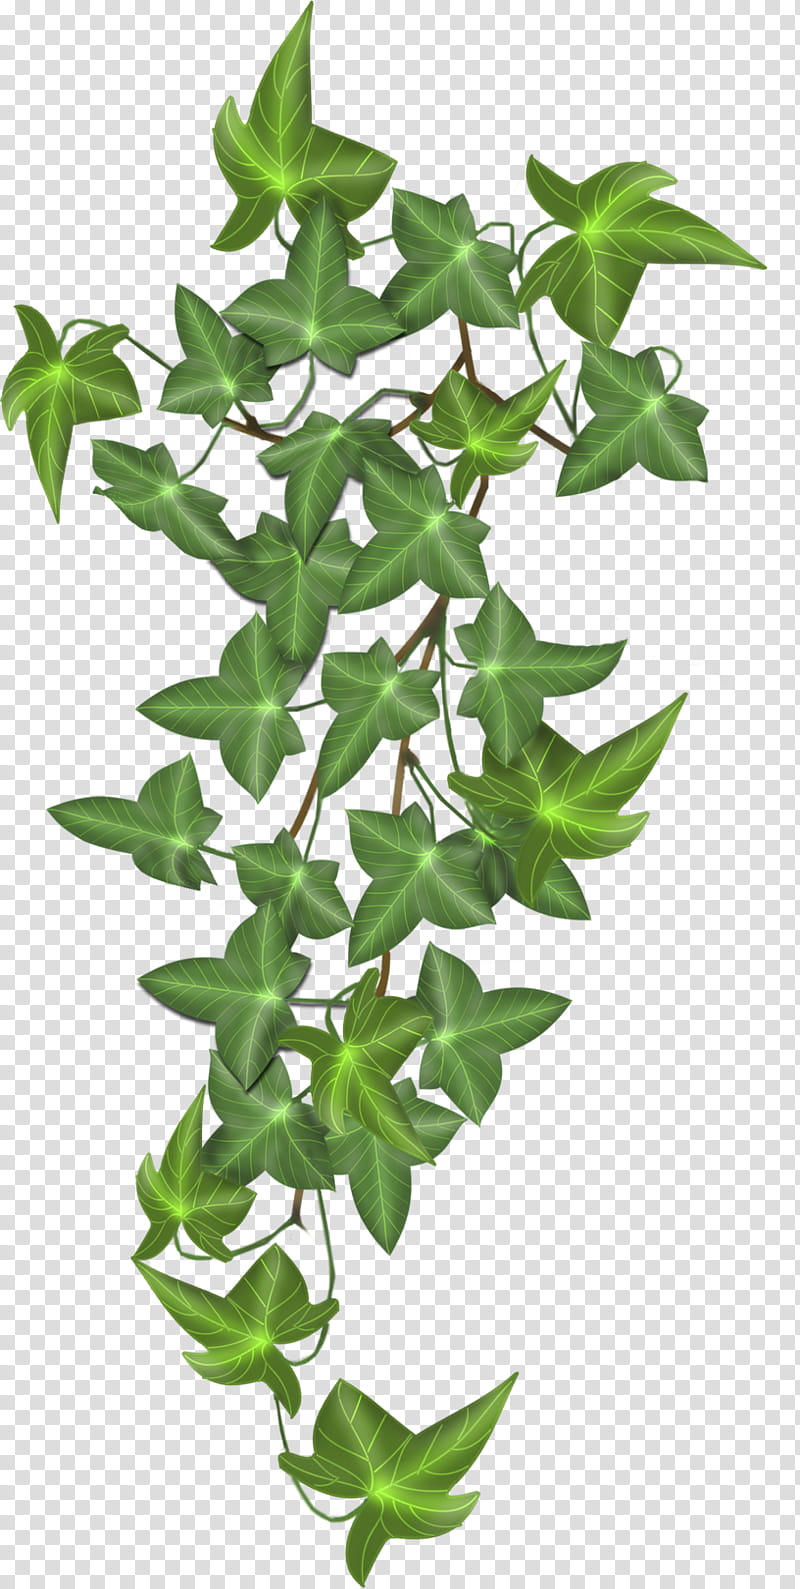 ivy, green ivy plant transparent background PNG clipart